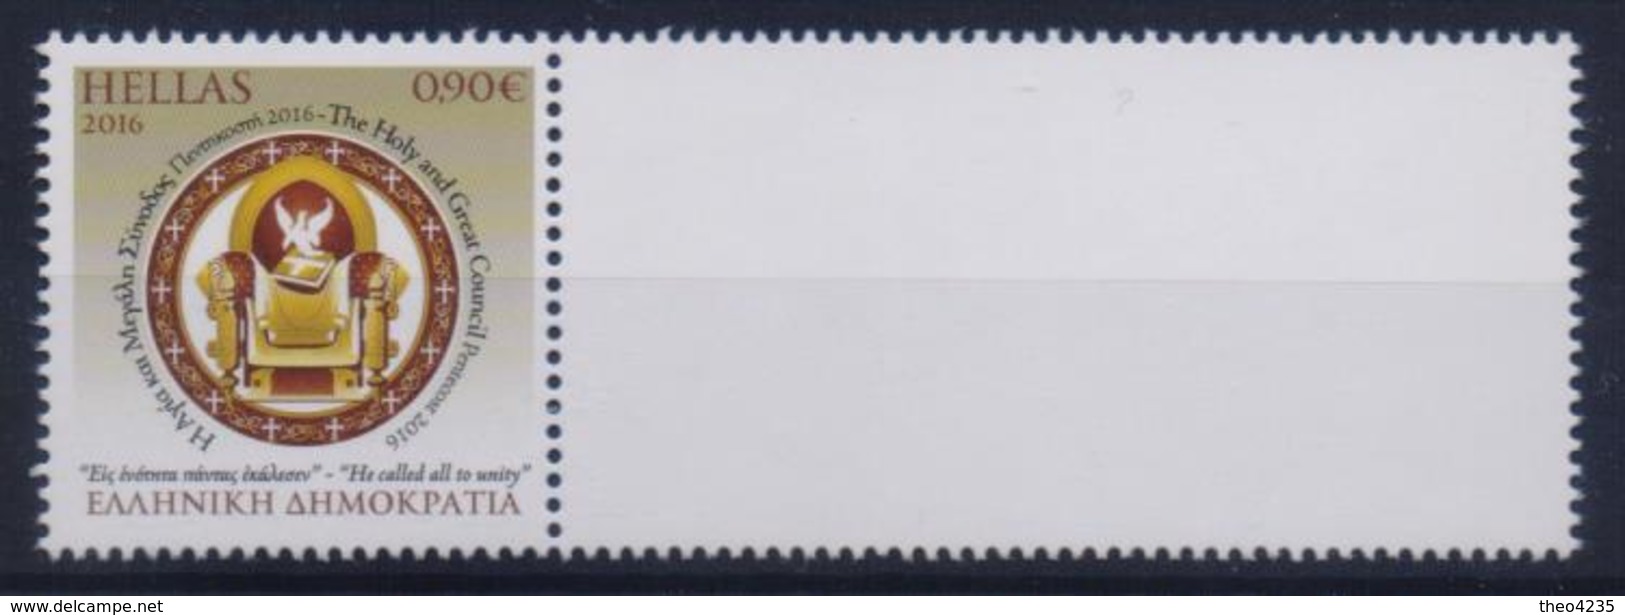 GREECE STAMPS WITH BLANK LABEL ANNIVERSARIES & EVENTS/THE HOLY & GREAT COUNCIL OF THE ORTHODOX CHURCH- MNH-RARE!!! - Ungebraucht